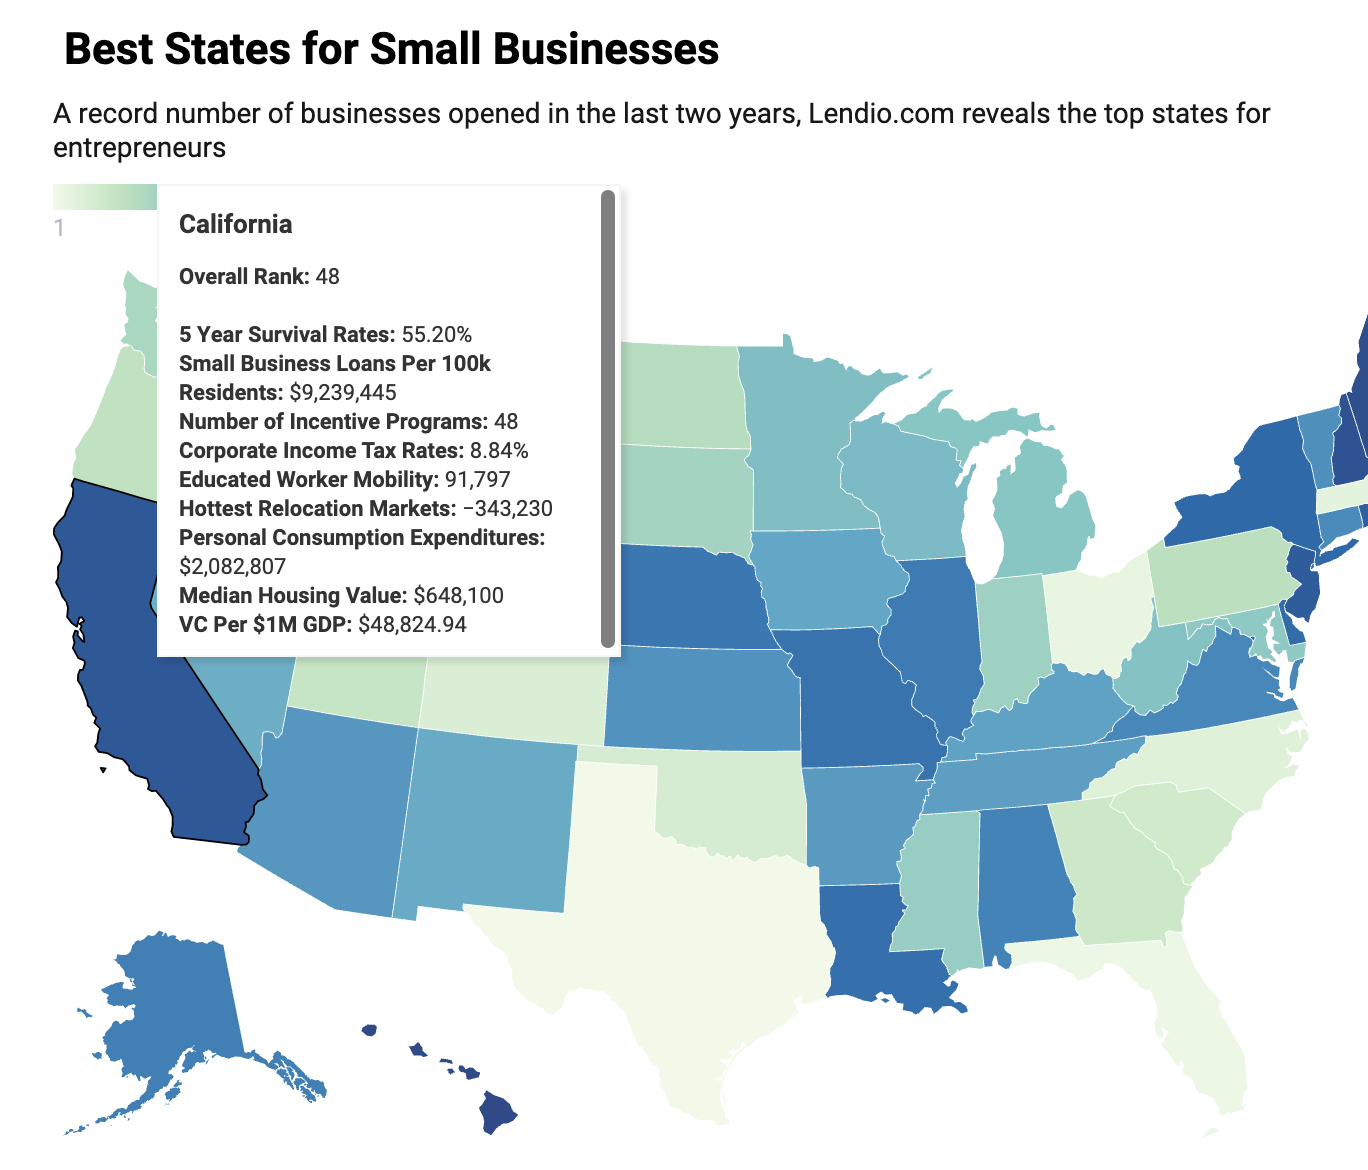 How To Start a Small Business in California